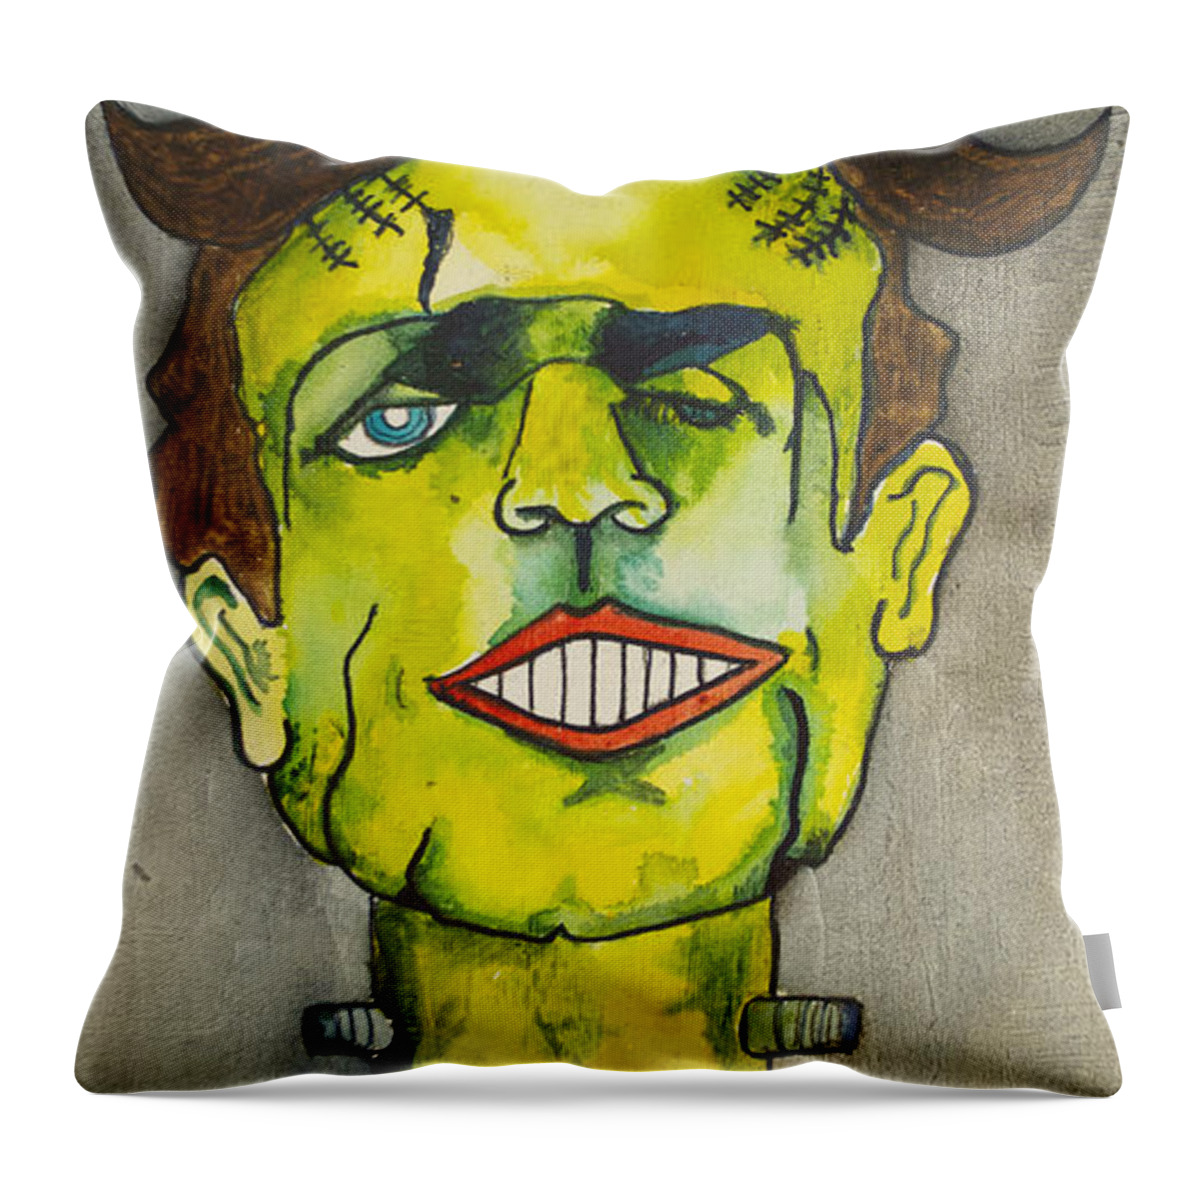 Frankenstein Throw Pillow featuring the painting Frankensteins Monster as Tillie by Patricia Arroyo